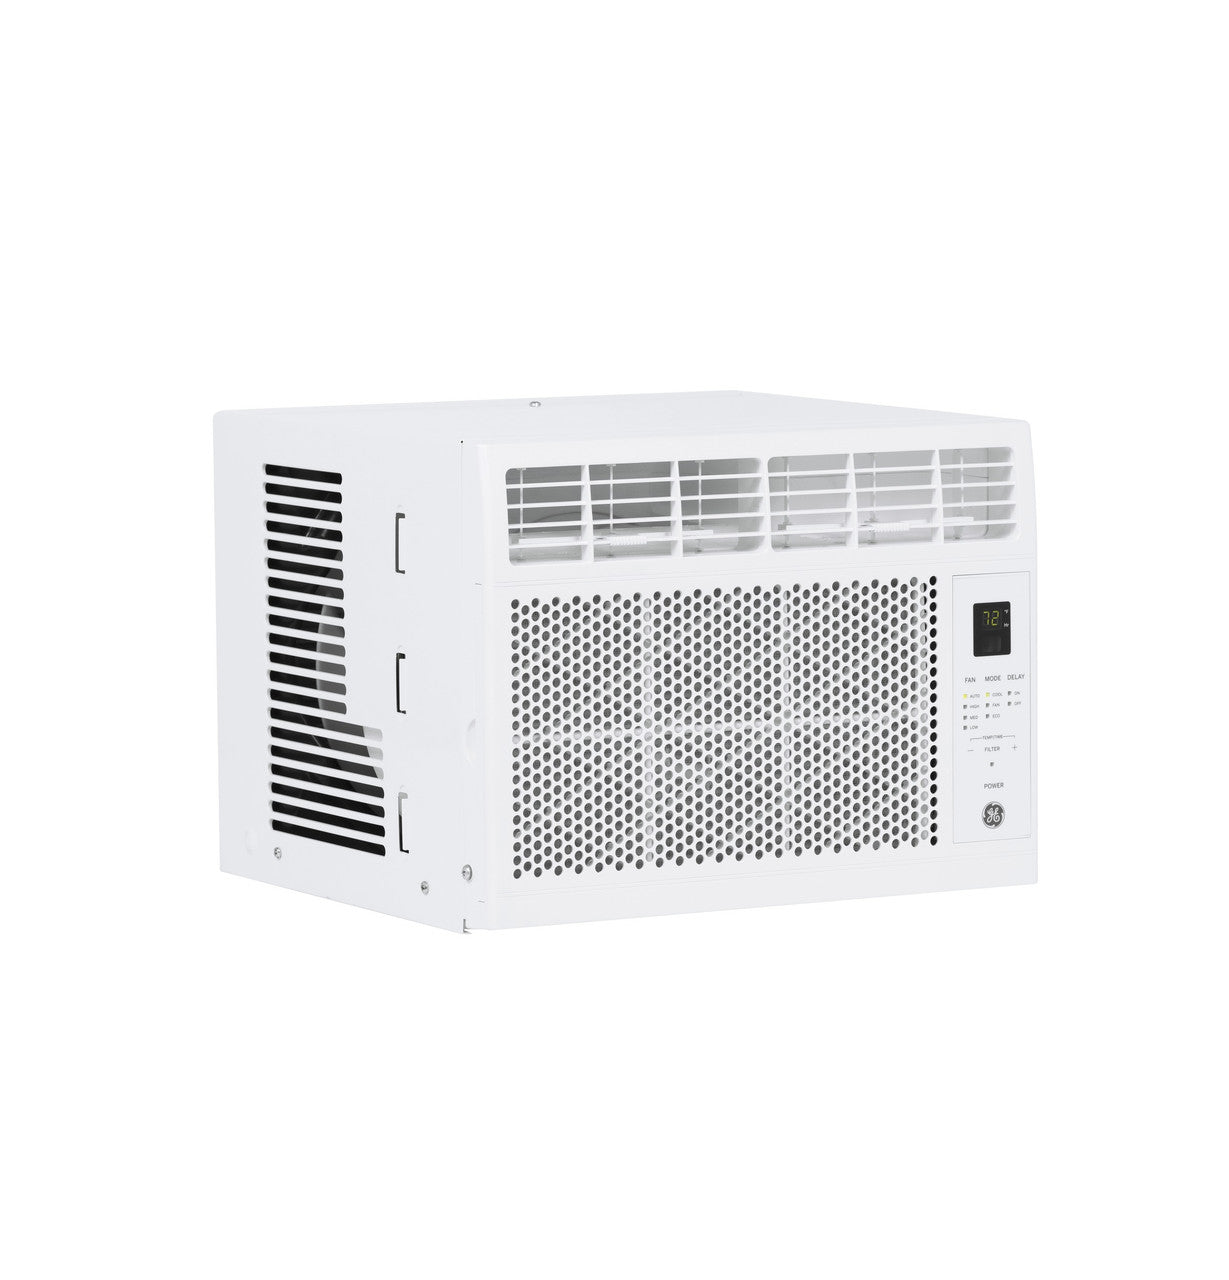 GE 5,000 BTU Electronic Window Air Conditioner for Small Rooms up to 150 sq ft. (Refurbished)